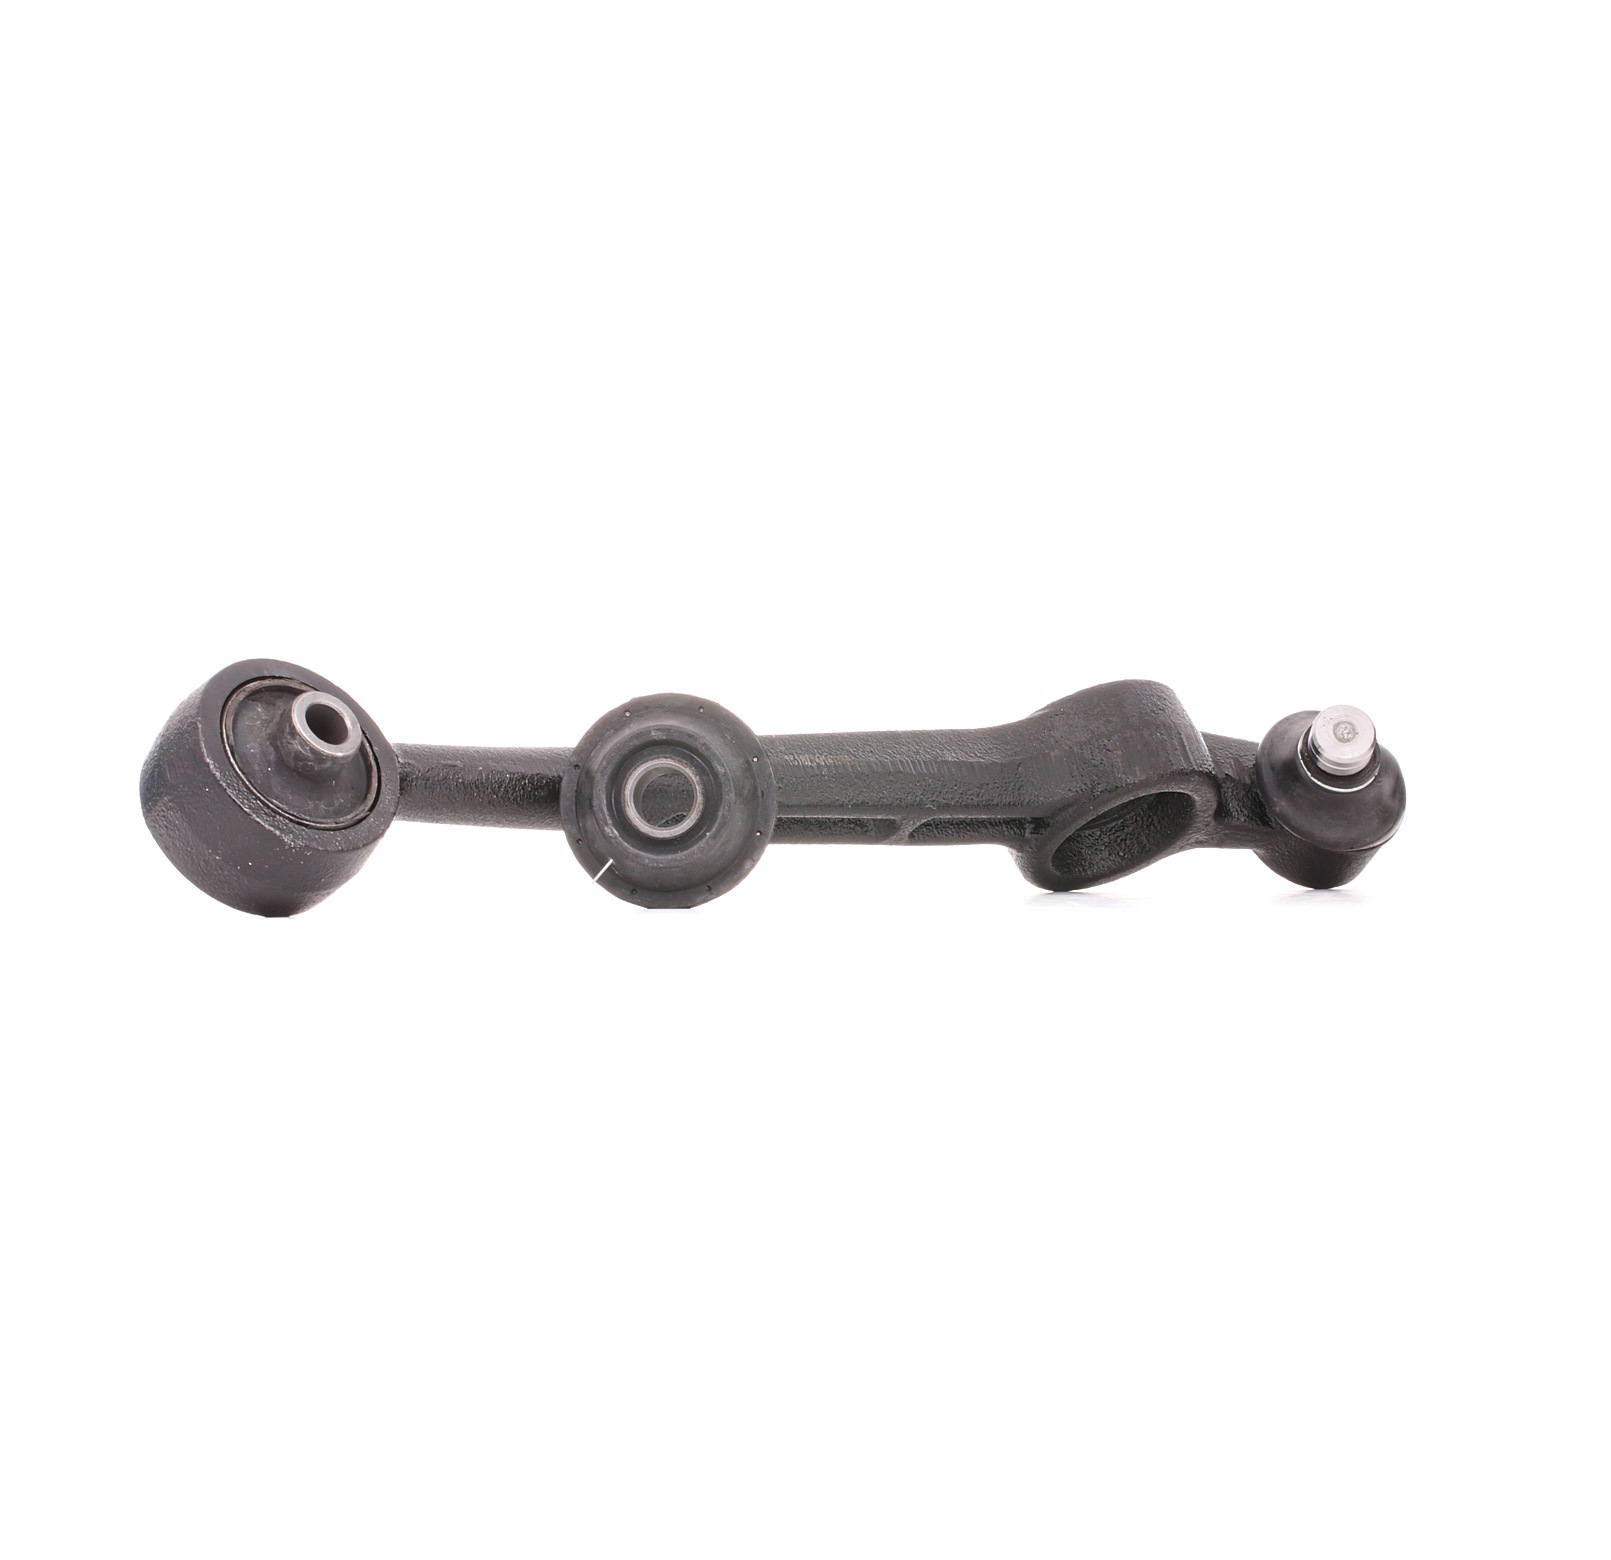 RIDEX 273C1319 Suspension arm with rubber mount, Lower, Front Axle Left, Control Arm, Steel, Cone Size: 19 mm